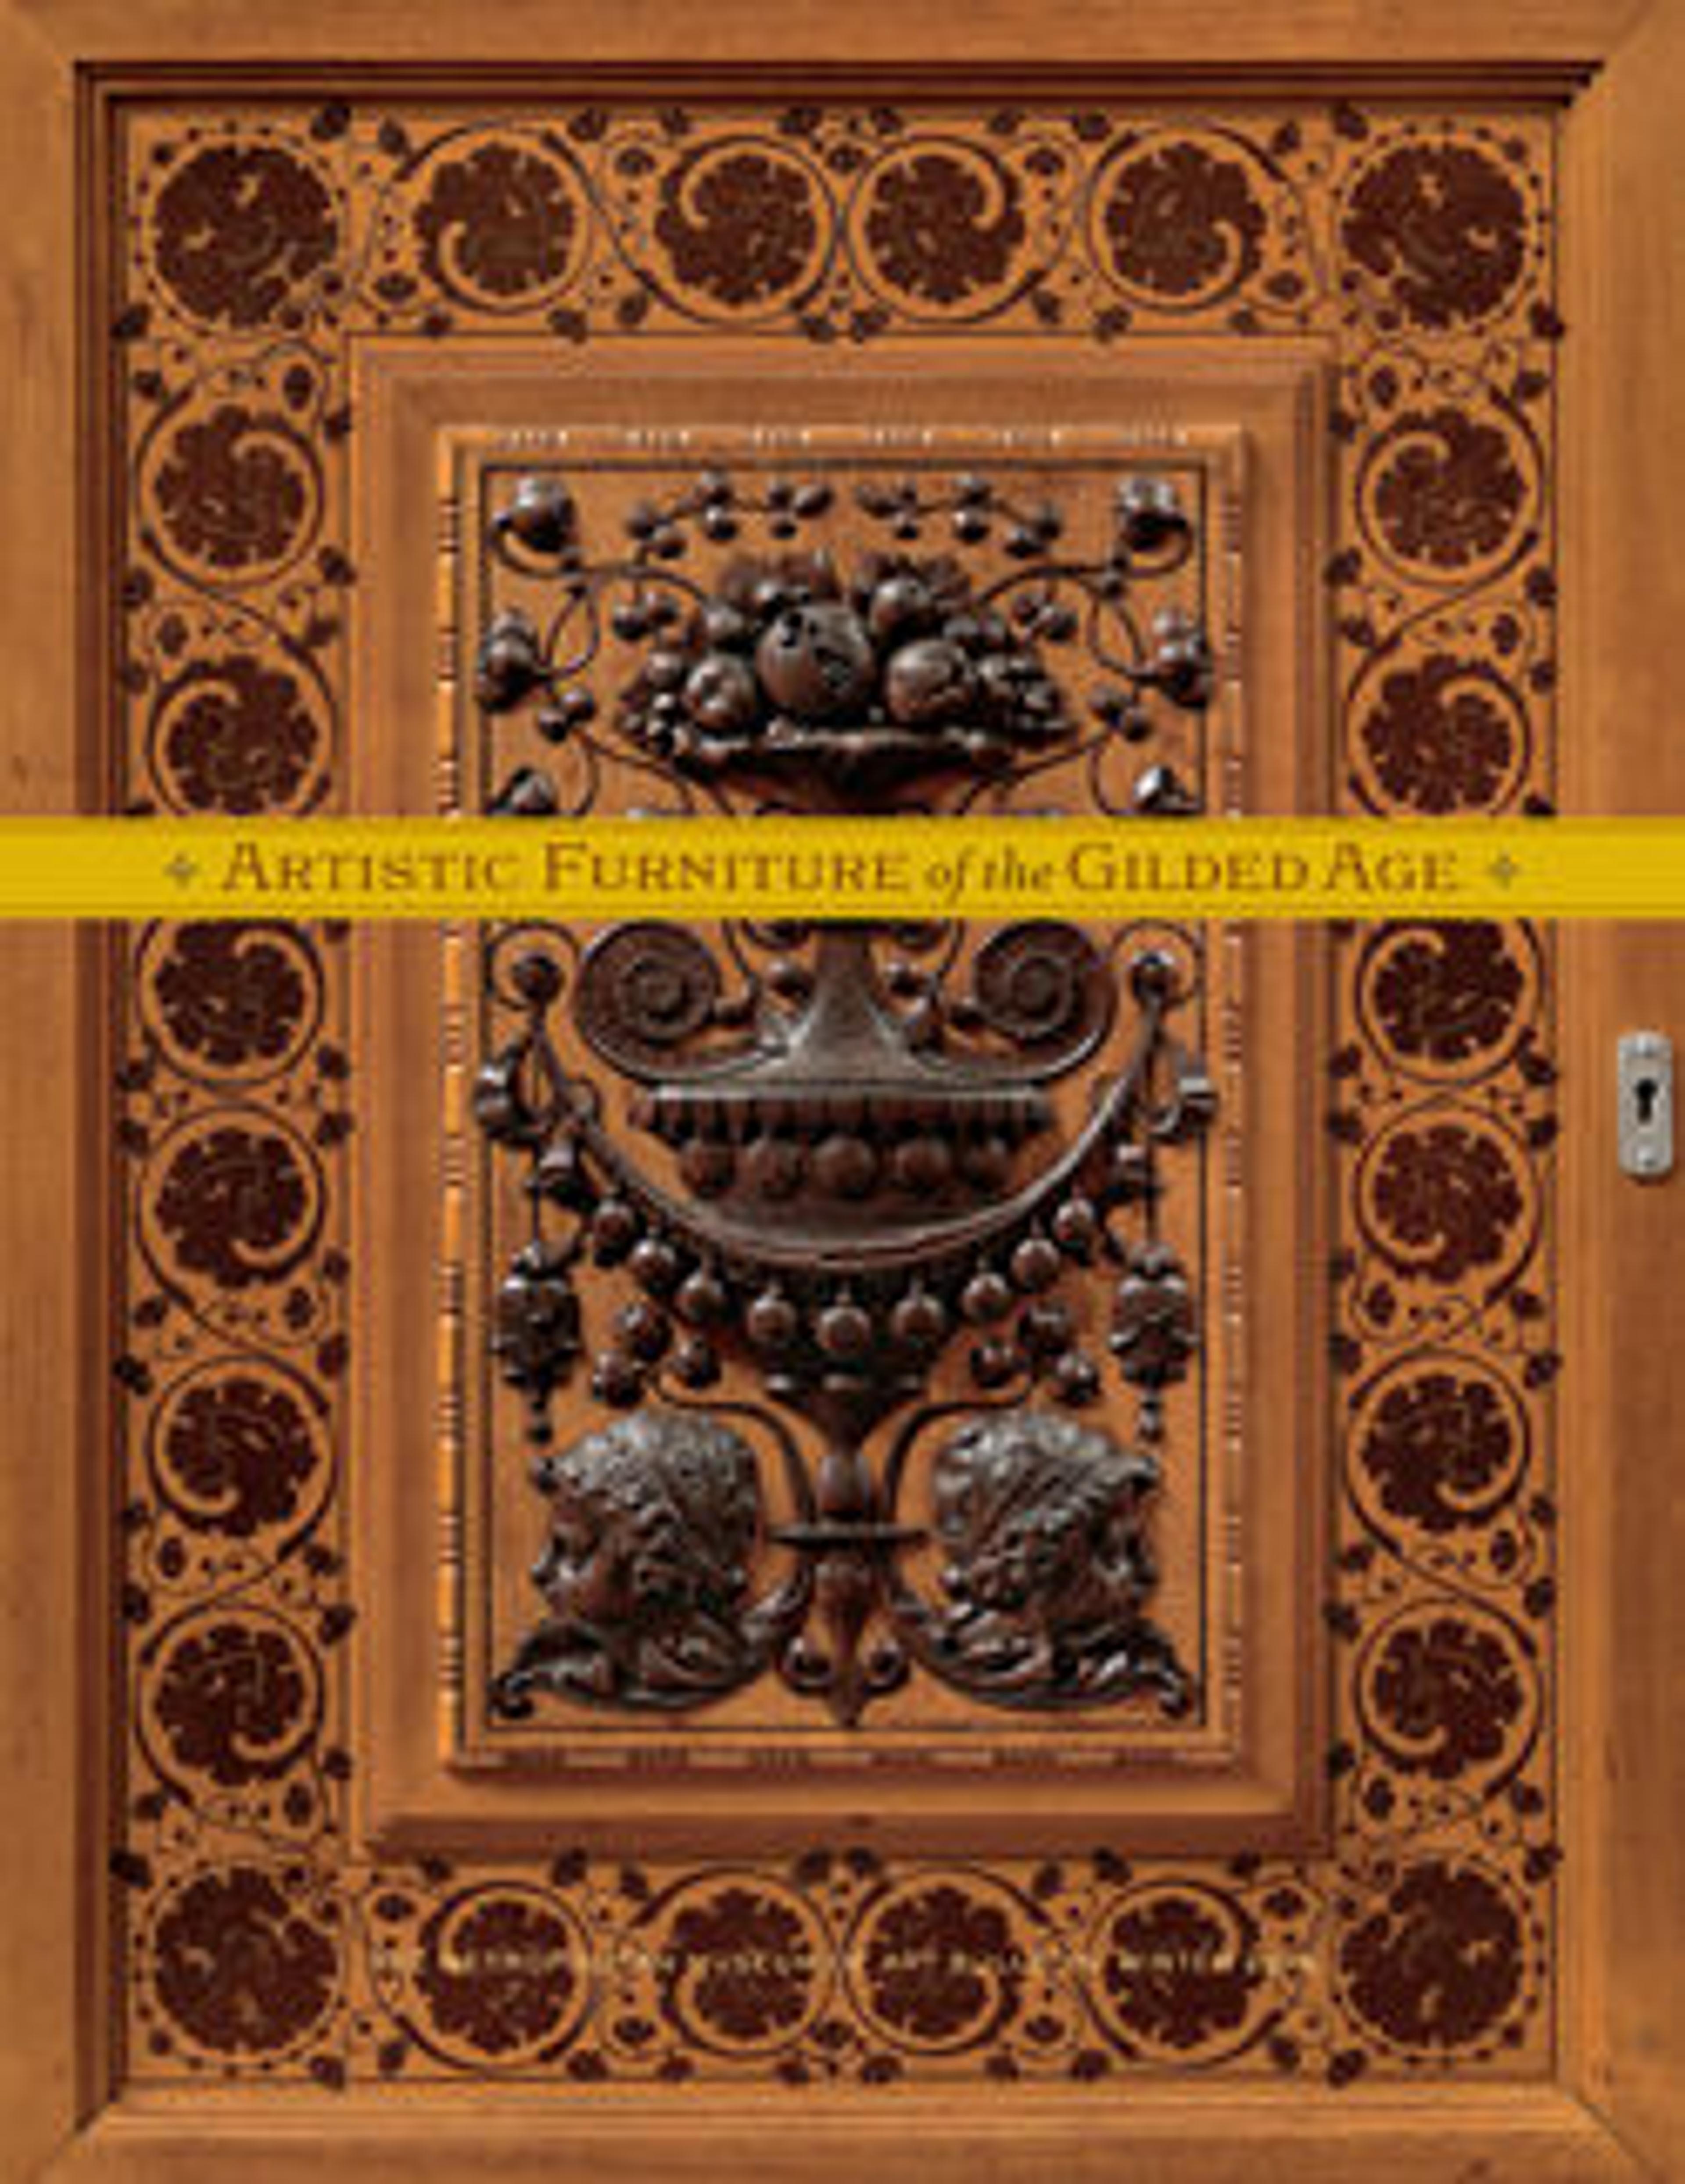 Artistic Furniture in the Gilded Age Cover